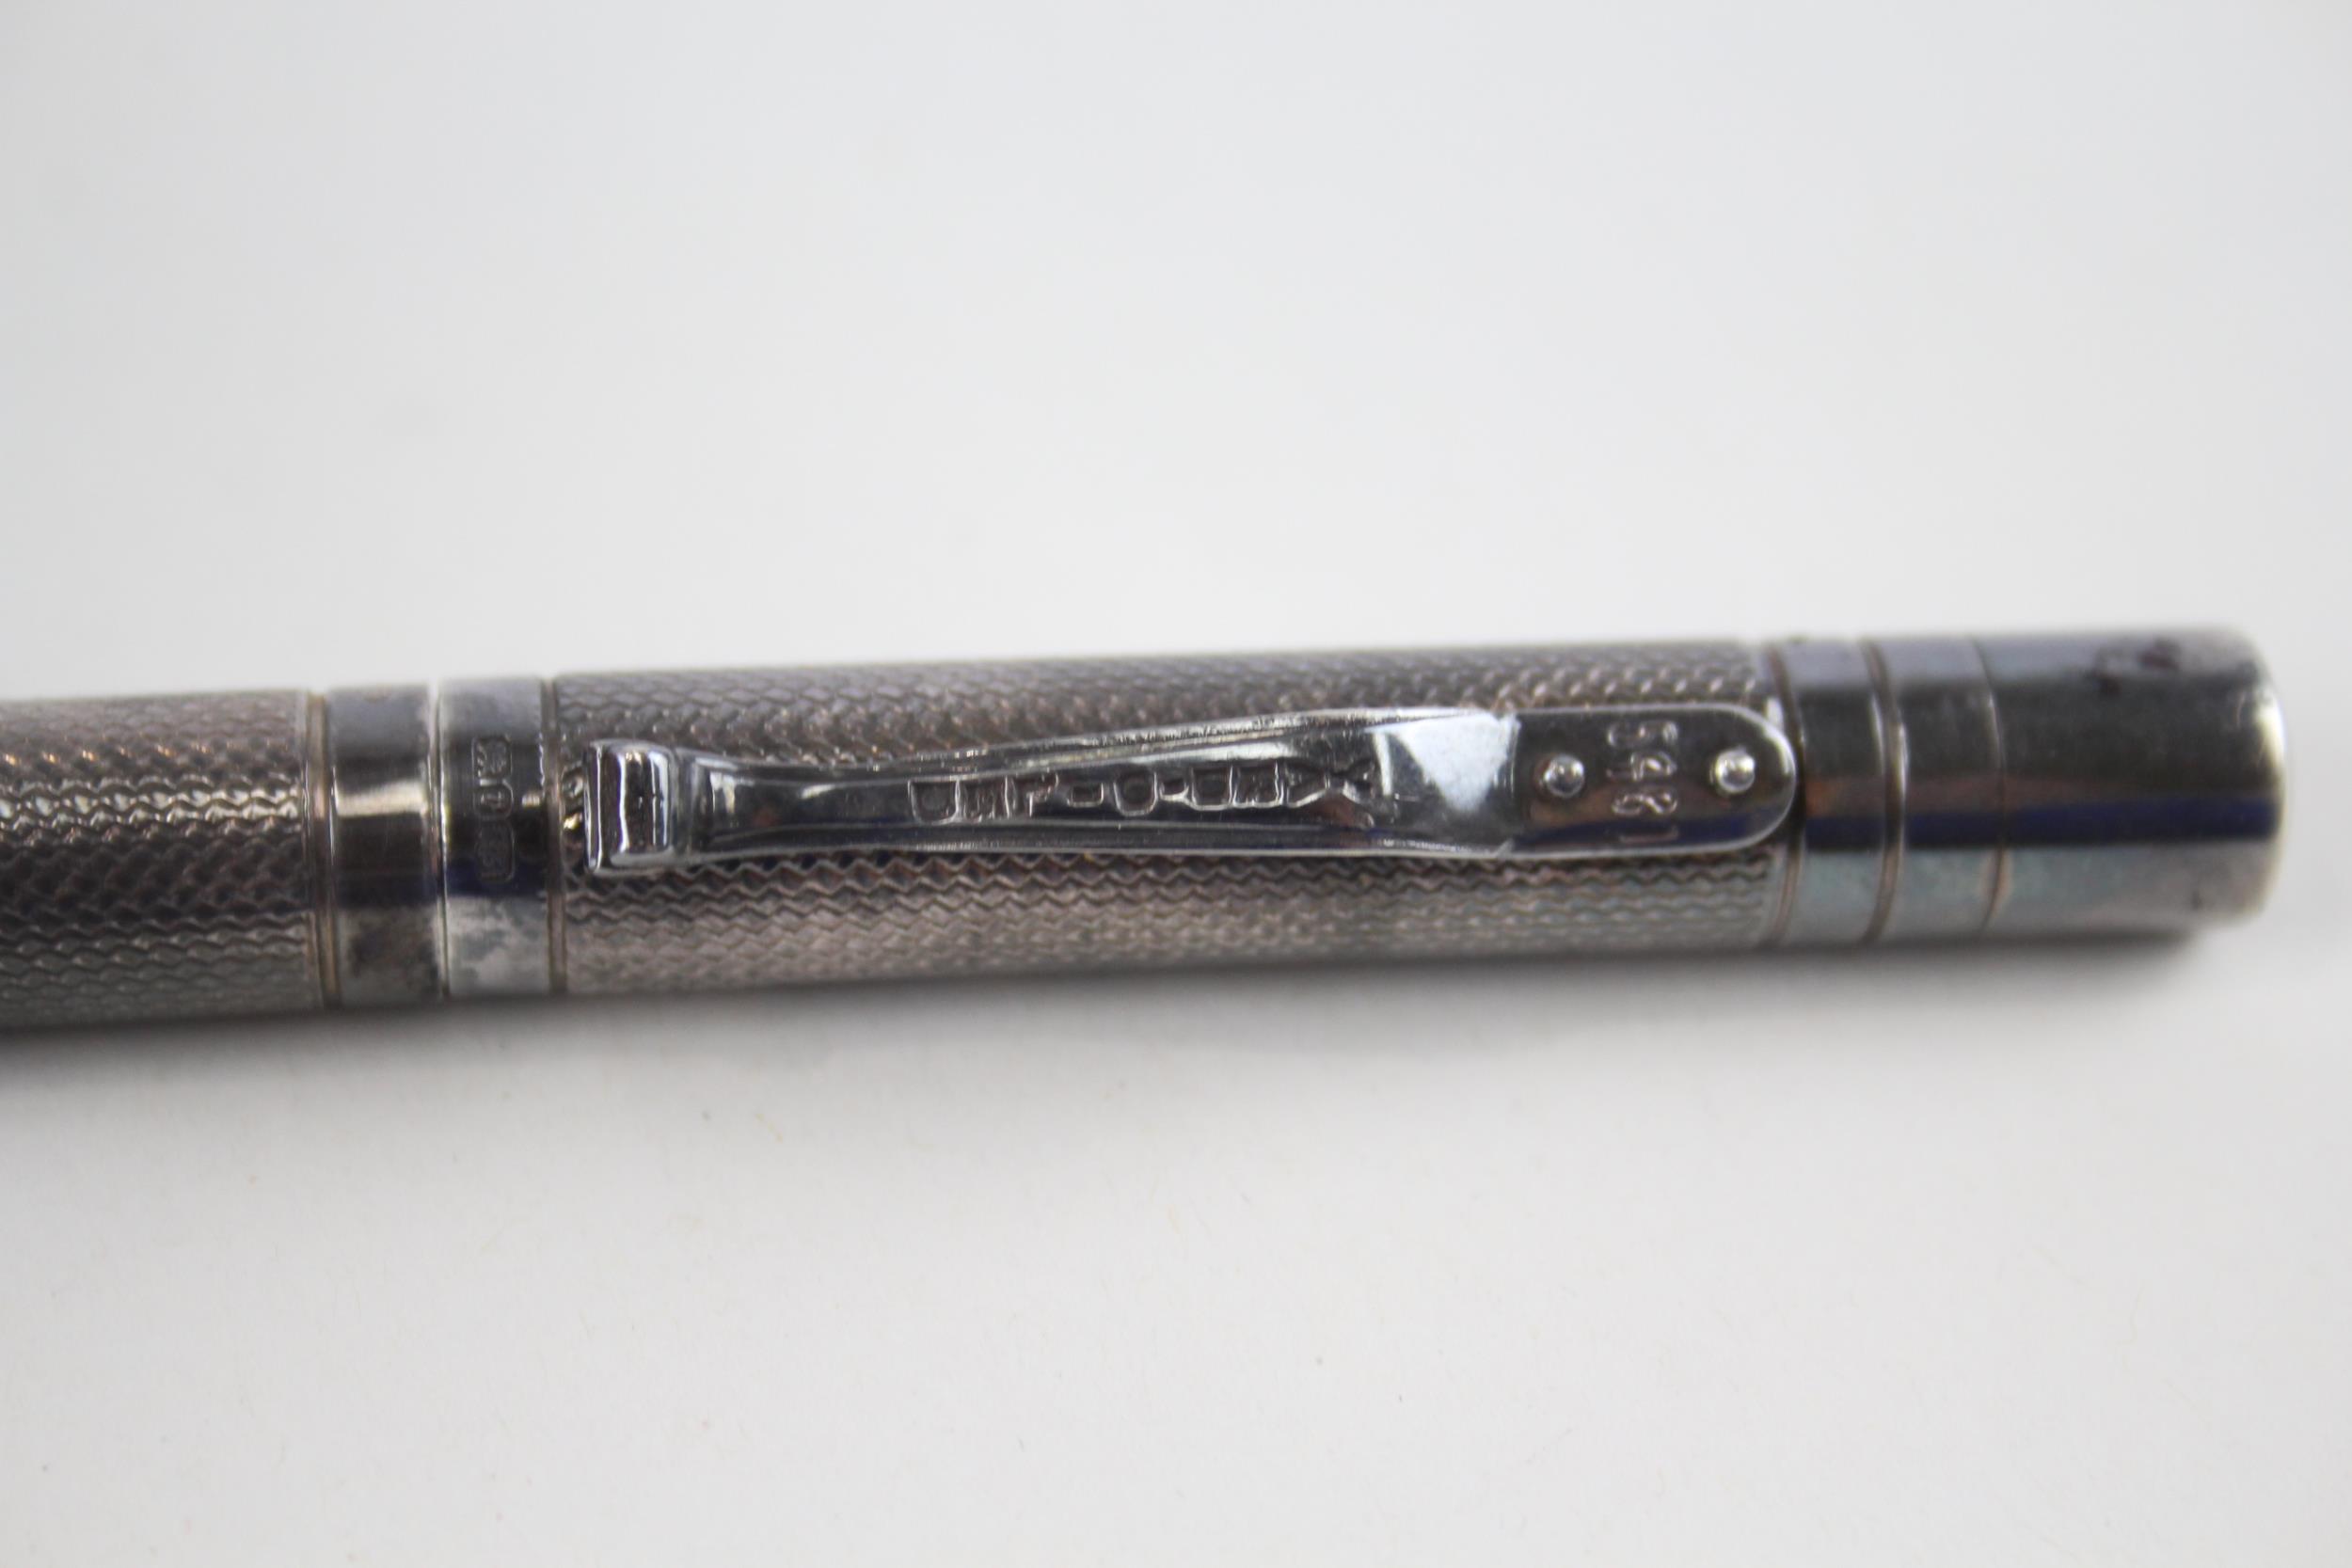 YARD O LED Hallmarked .925 Sterling Silver Fountain Pen w/ 18ct Gold Nib (31g) - w/ 18ct White - Image 5 of 6